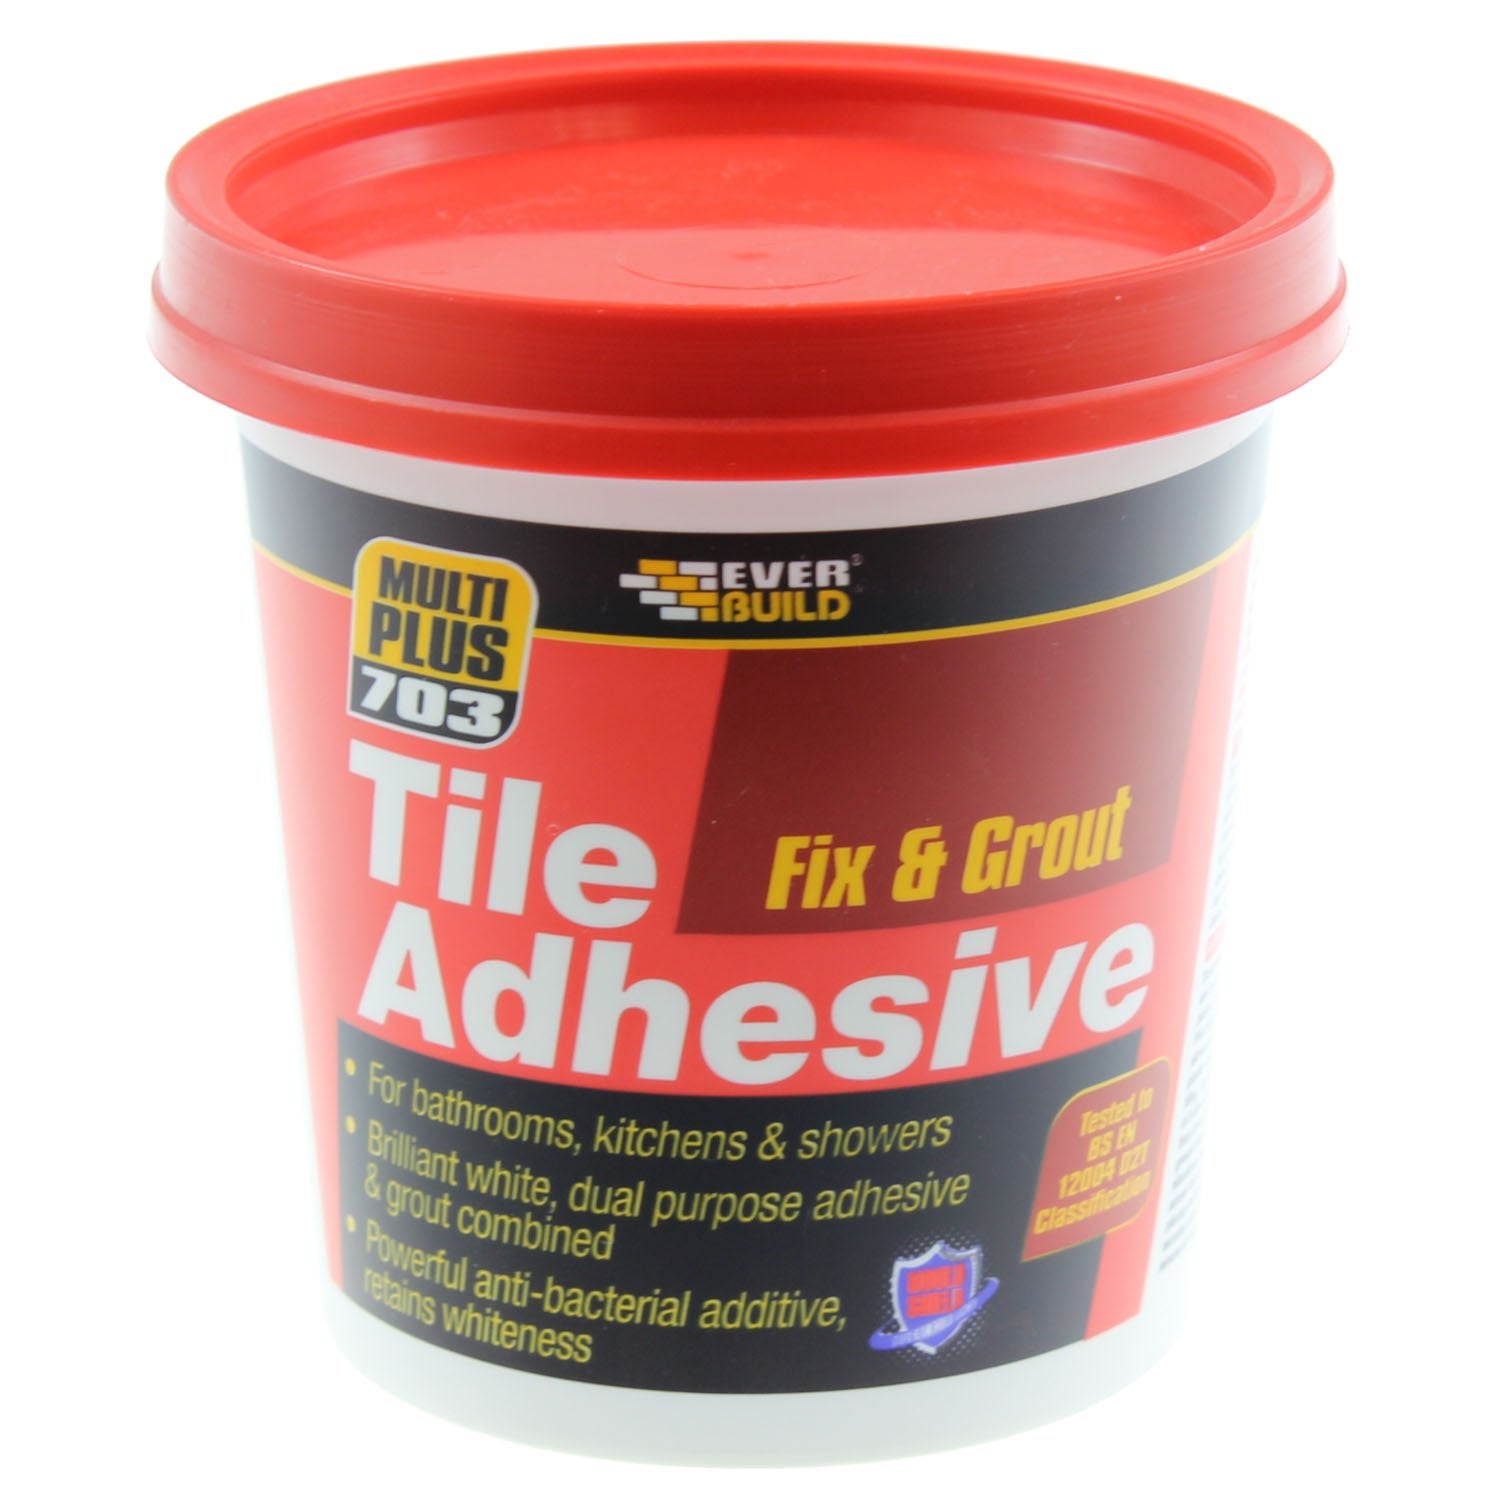 Everbuild 703 Fix and Grout Tile Adhesive 750G